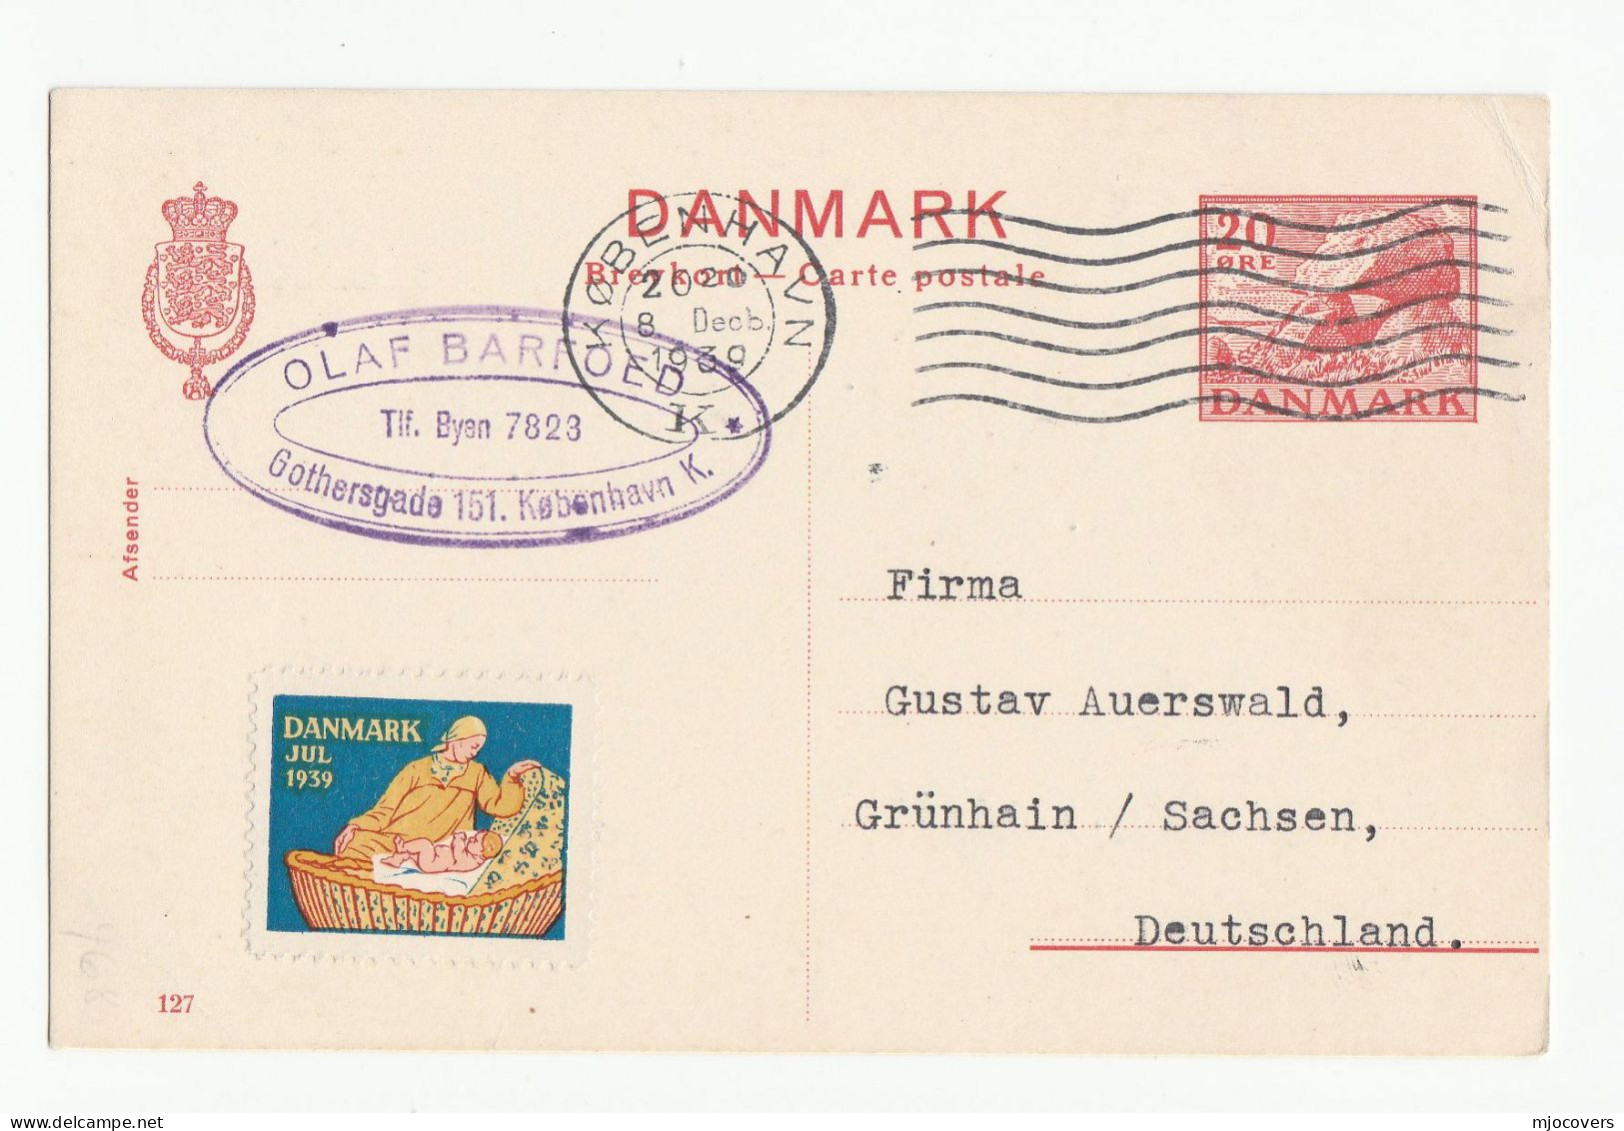 1939 DENMARK To Grunhain Germany With CHRISTMAS Label Women Baby POSTAL STATIONERY CARD Cover Stamps - Enteros Postales